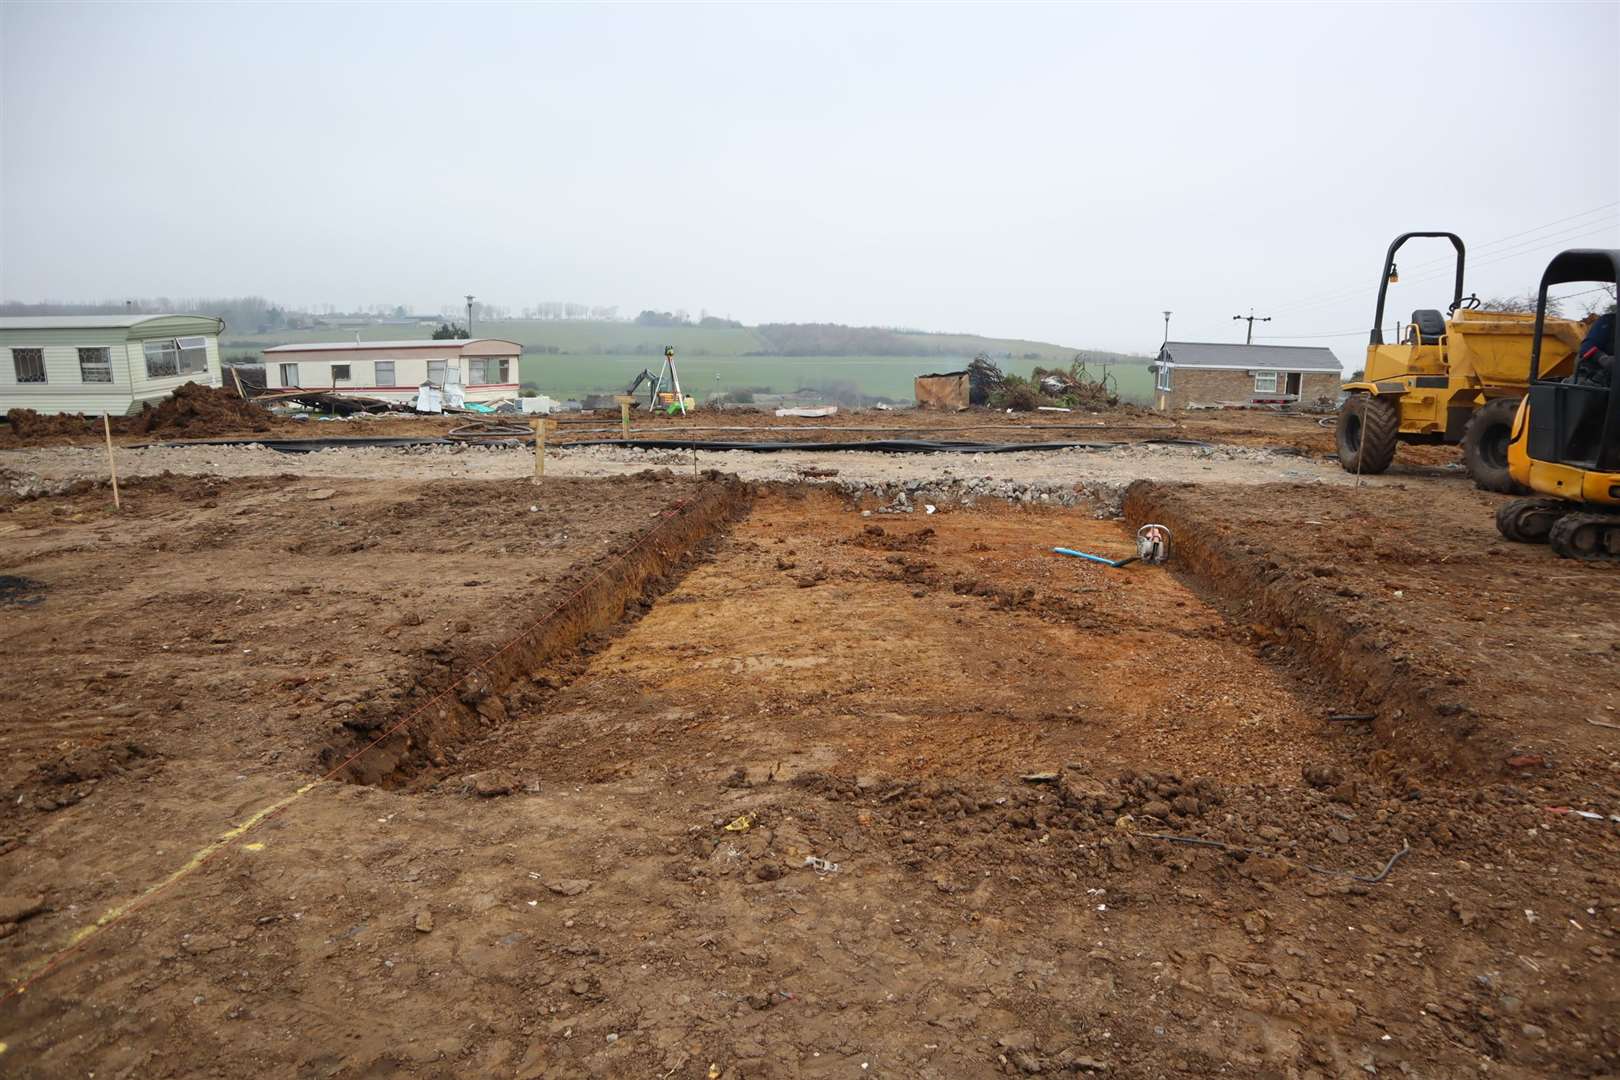 Digging foundations for new luxury lodges at Eastchurch Holiday Centre on the Isle of Sheppey